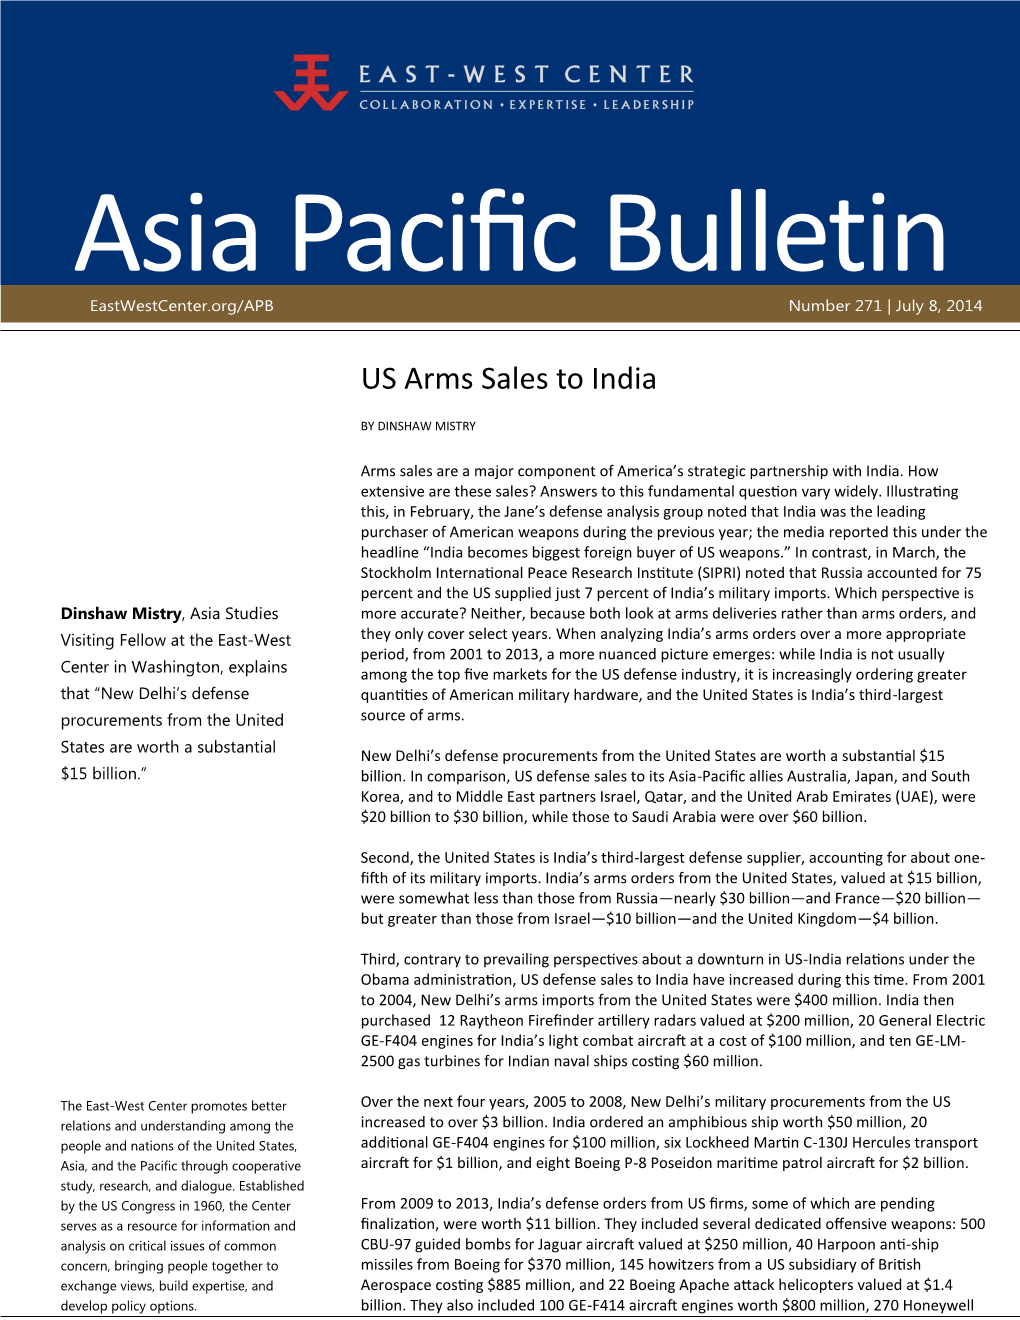 US Arms Sales to India